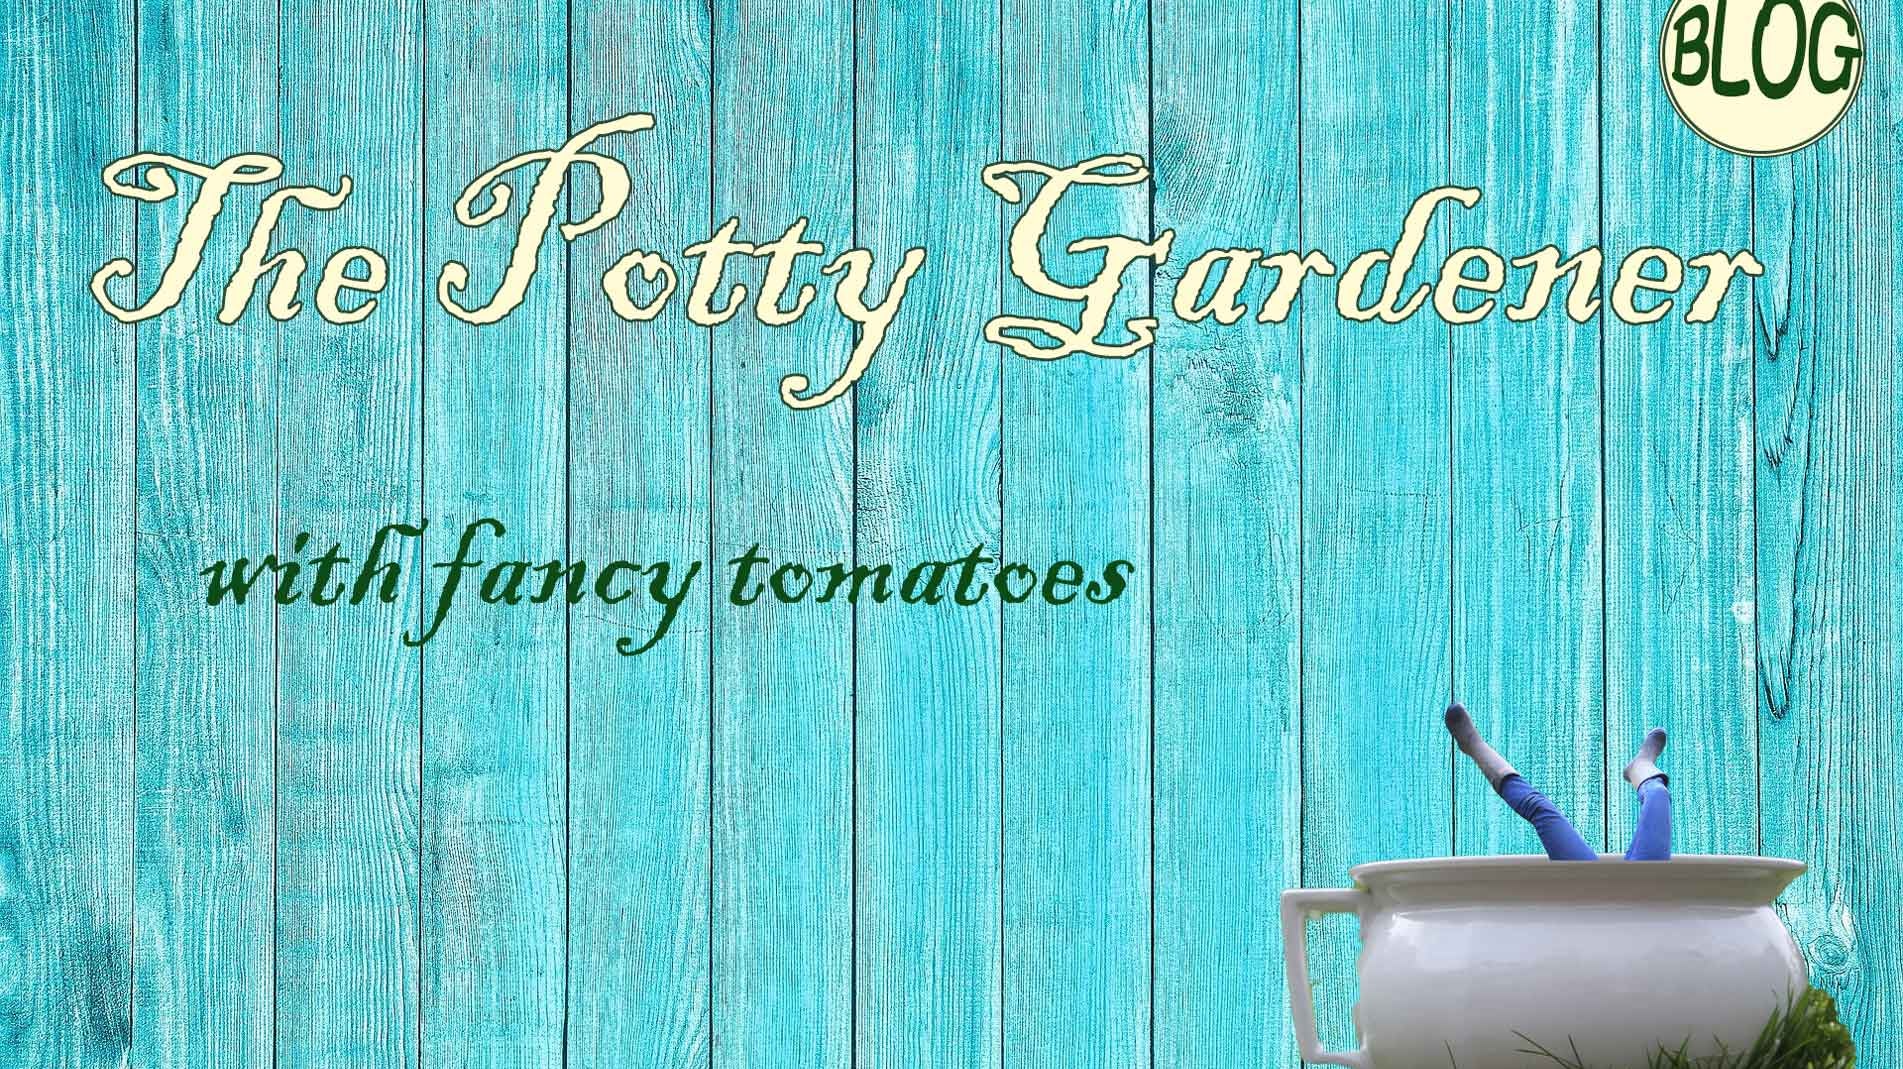 How to grow fancy tomatoes The potty Gardener